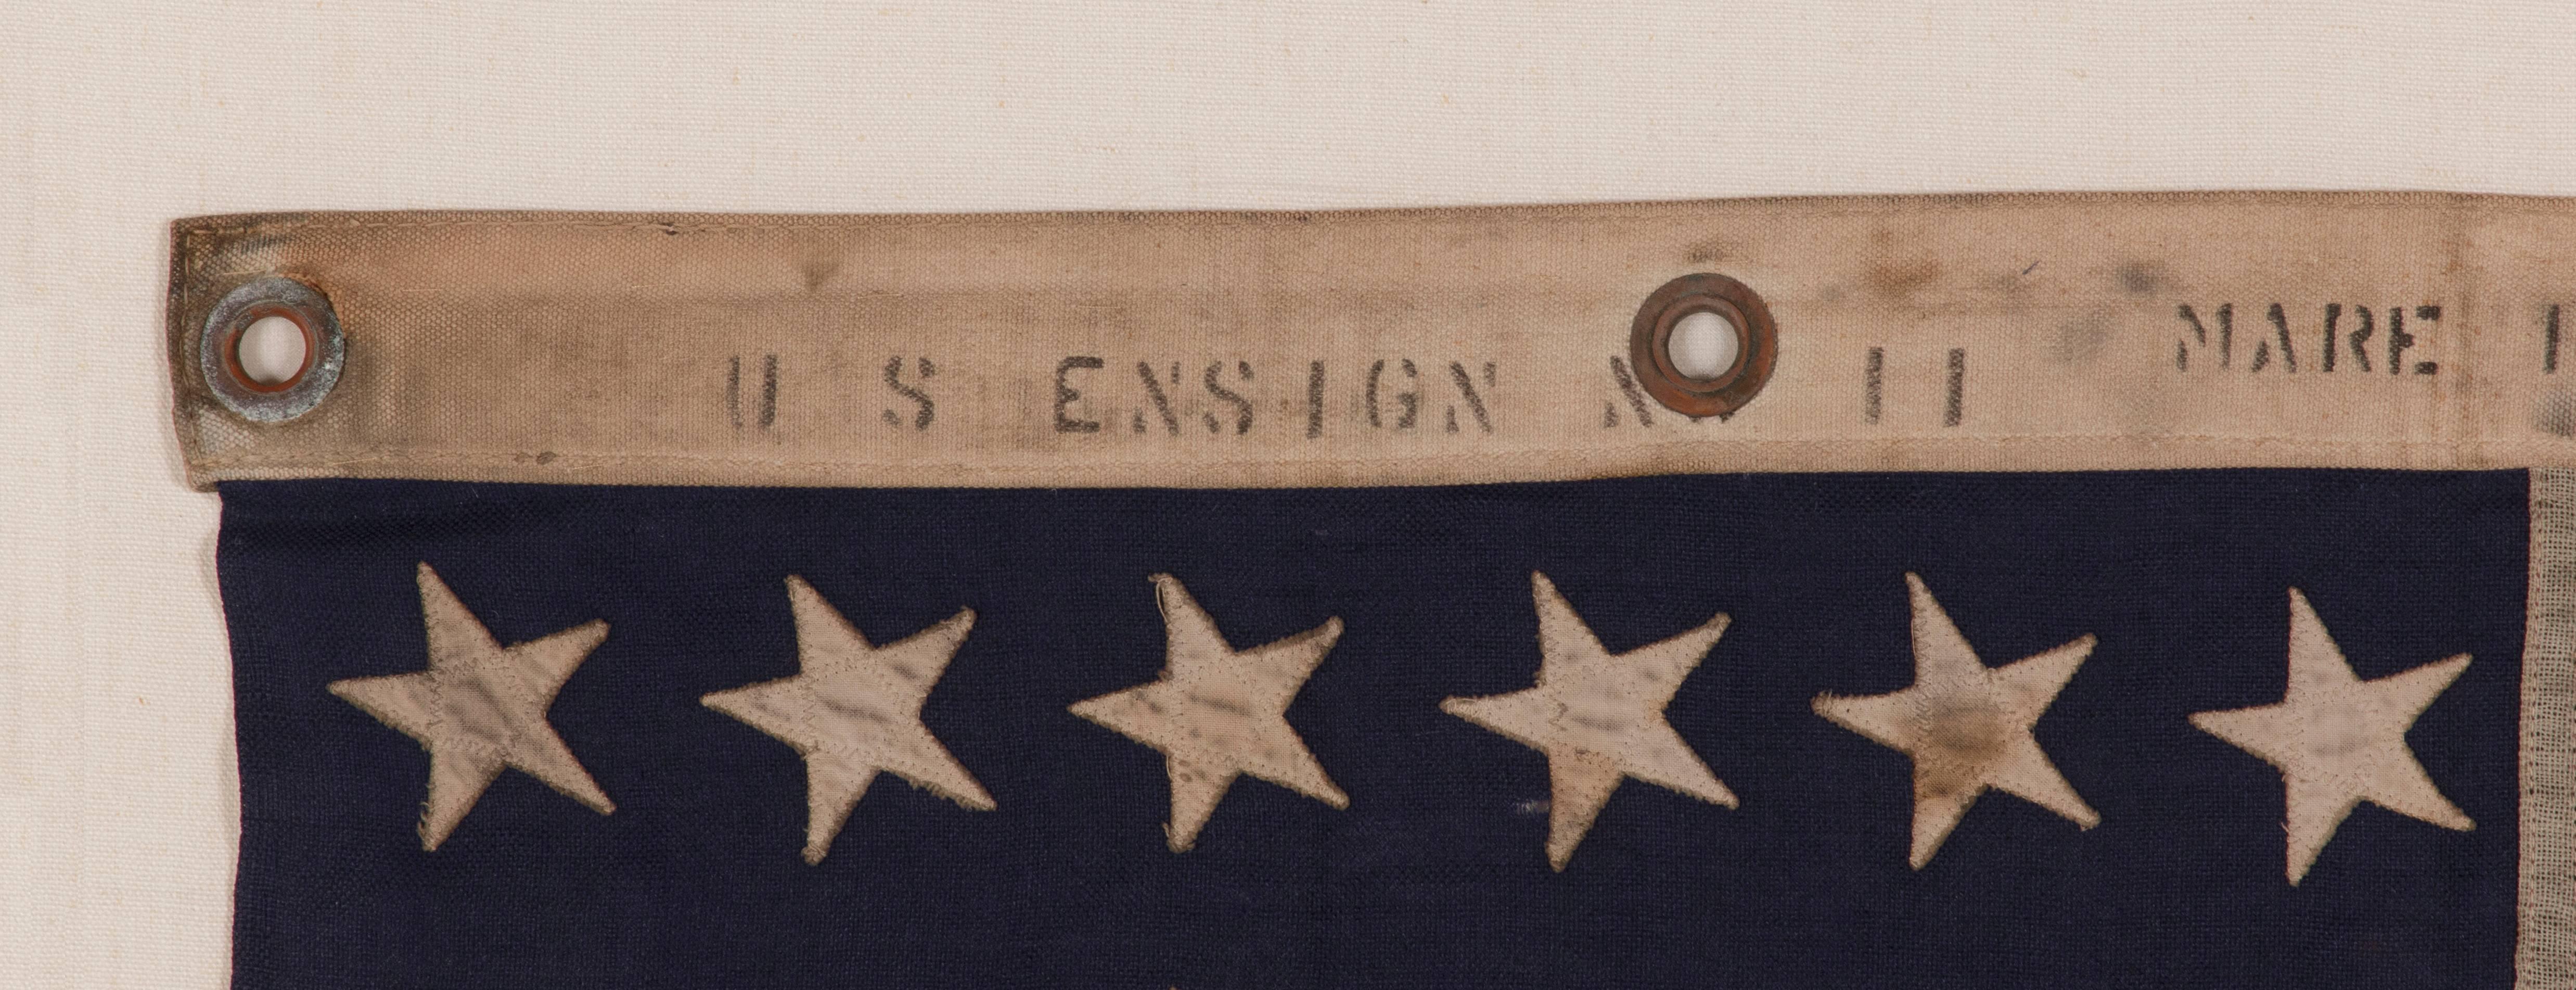 48 Star, U.S. Navy Small Boat Ensign, Dated July 1942 1